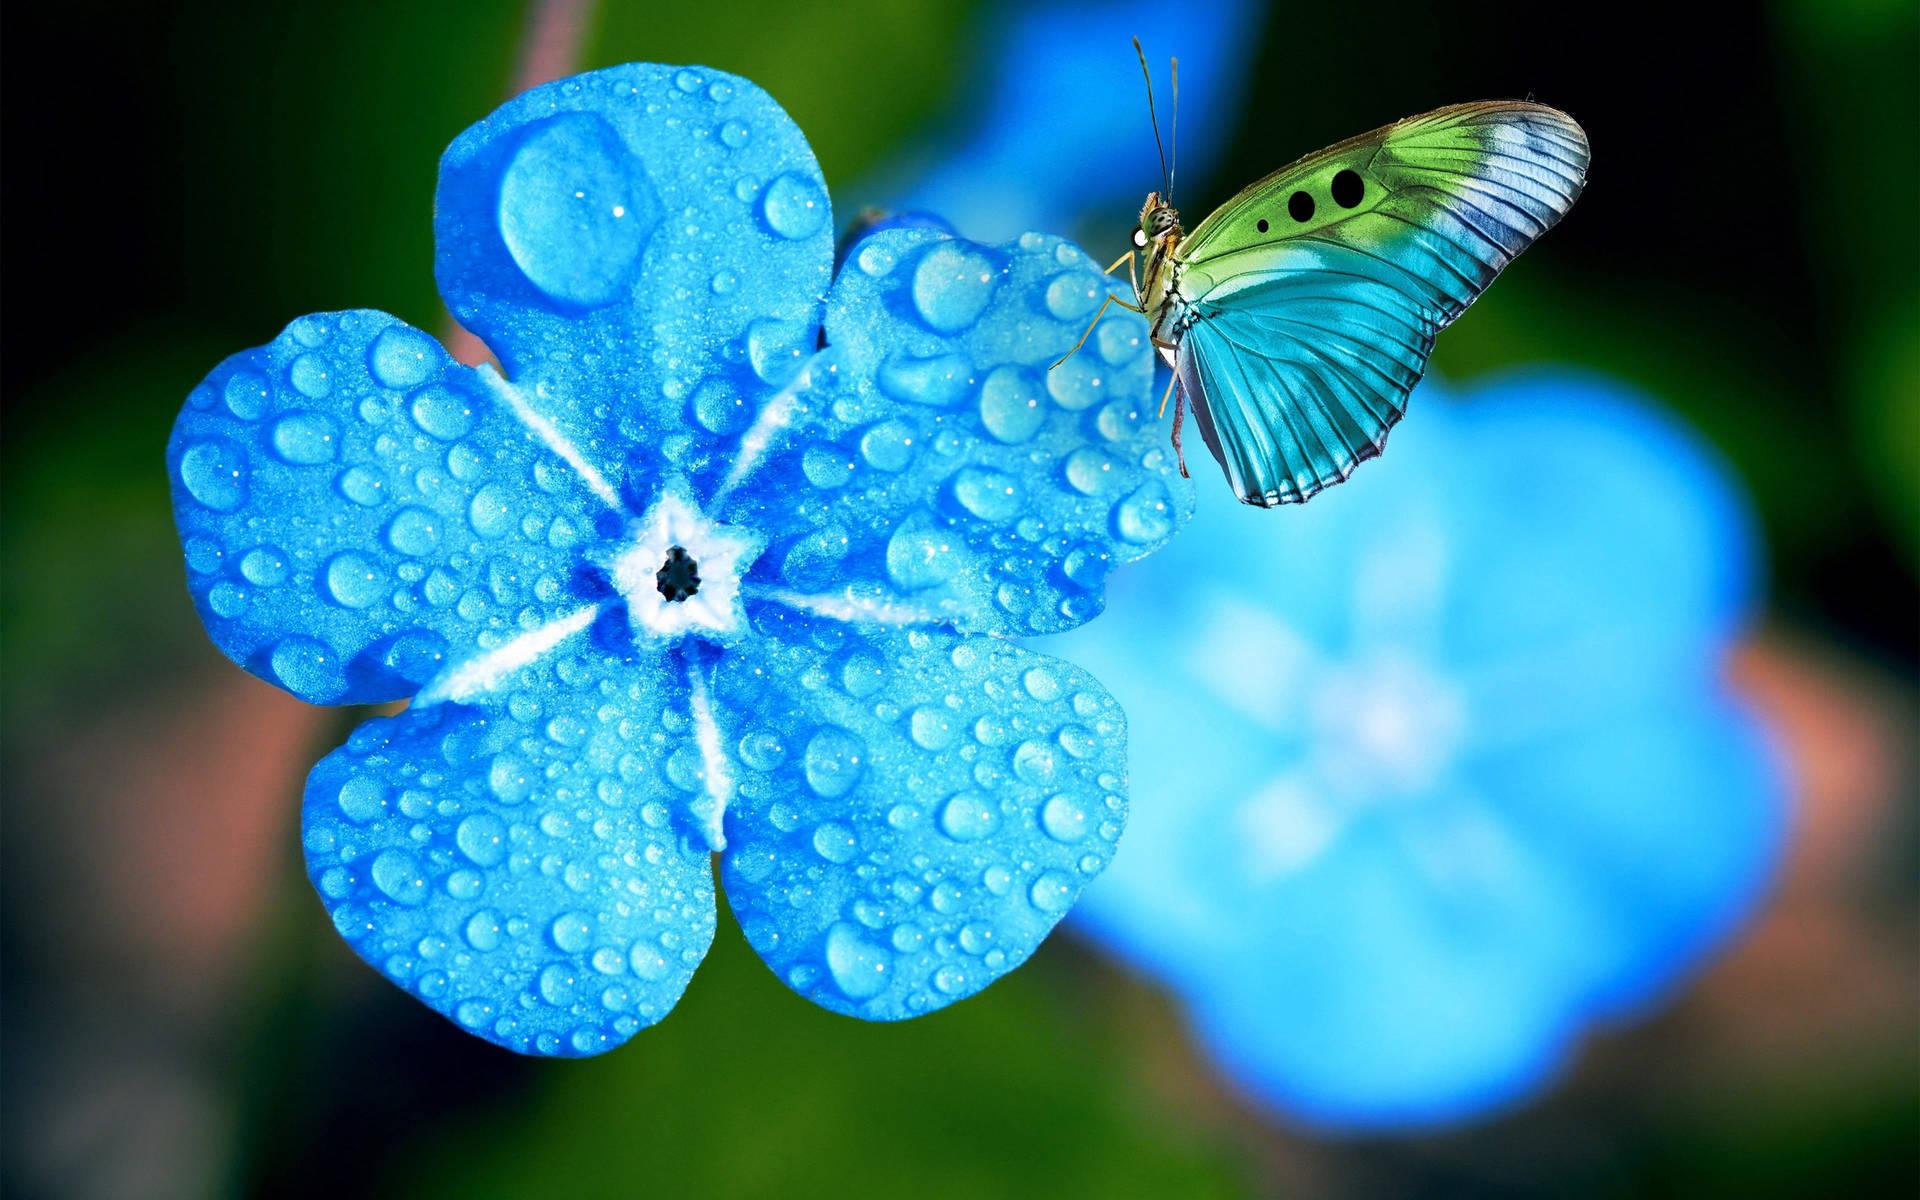 Butterfly On Flower Drenched In Water Droplets Wallpaper